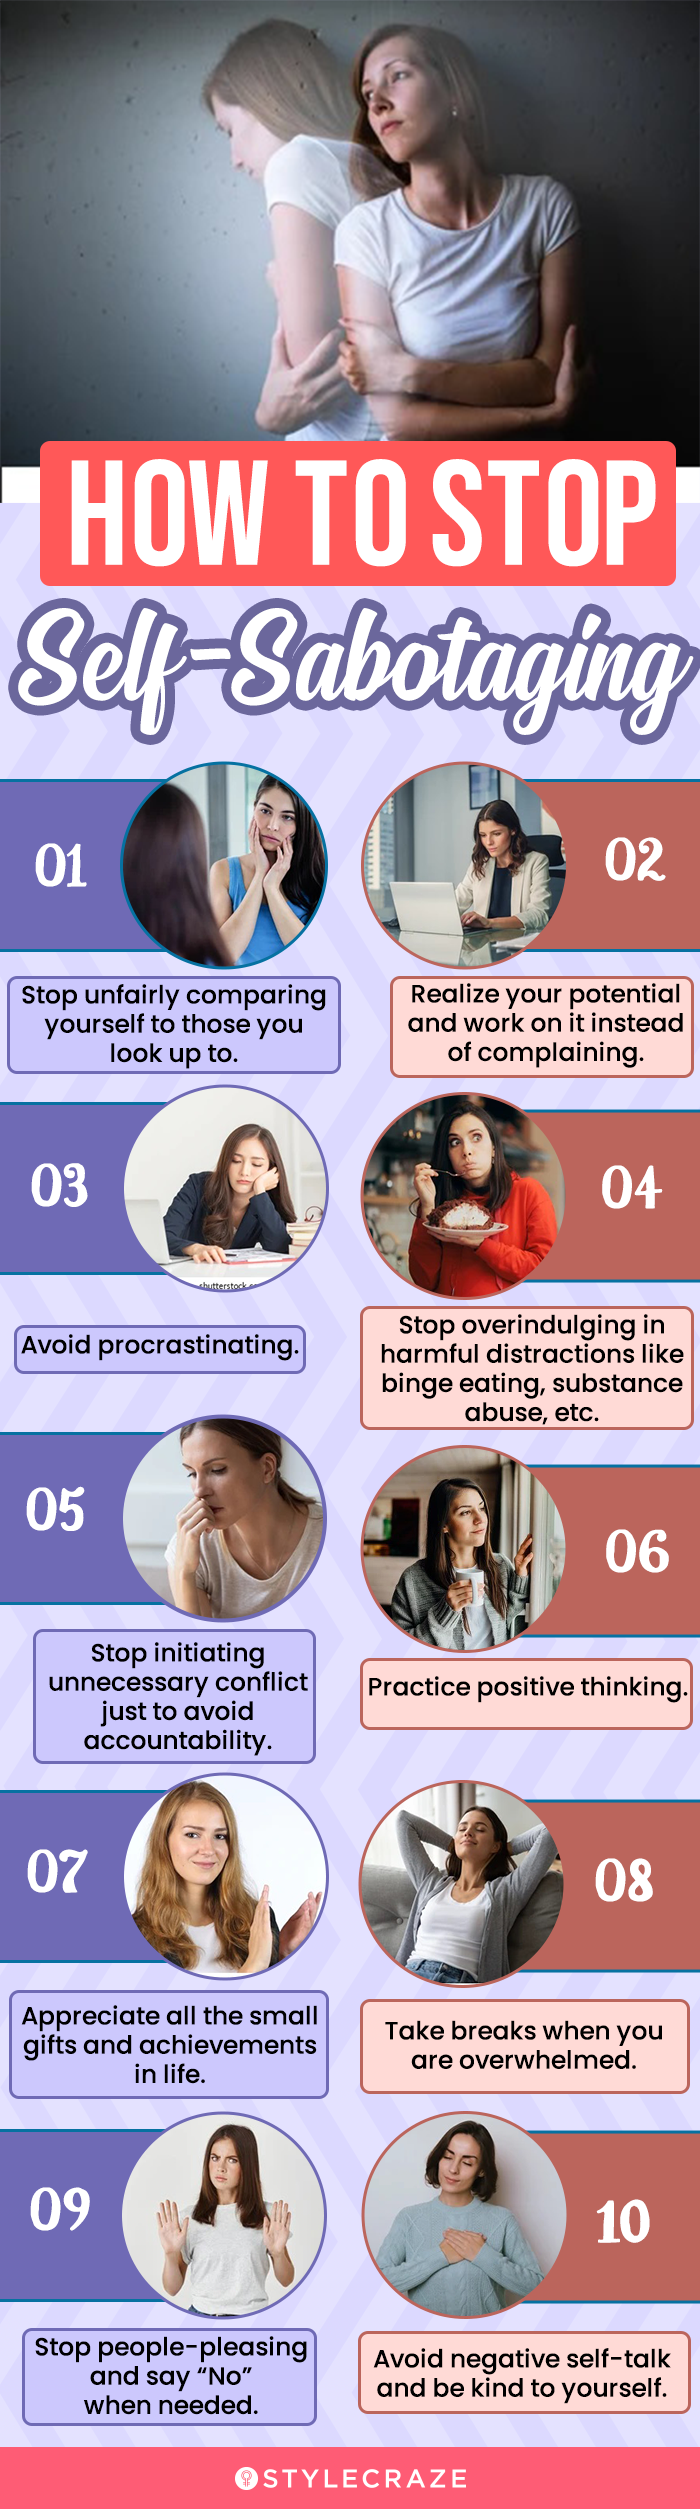 how to stop self sabotaging (infographic)